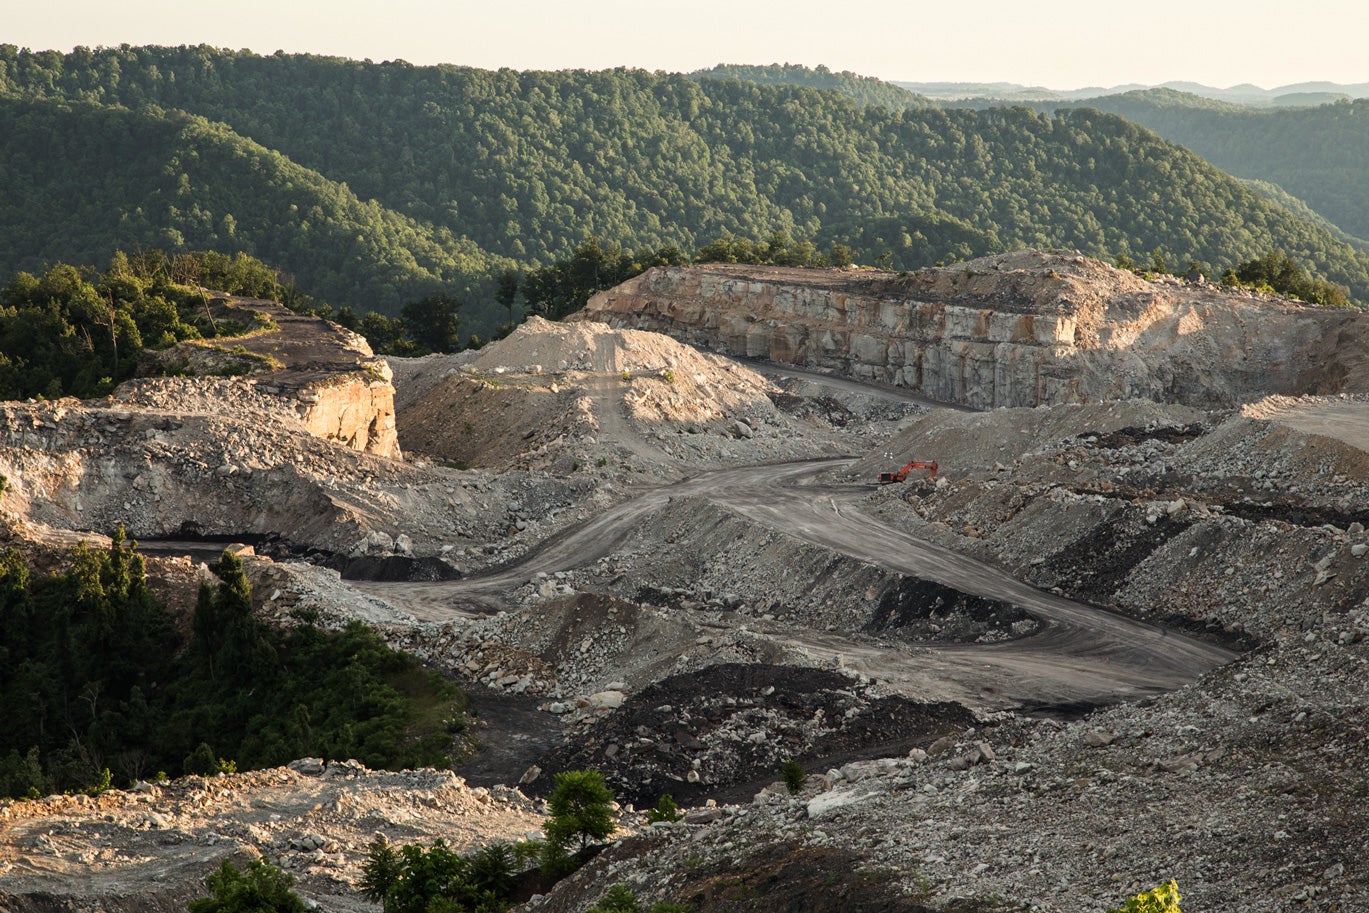 Mountaintop removal mining has devastated West Virginia.